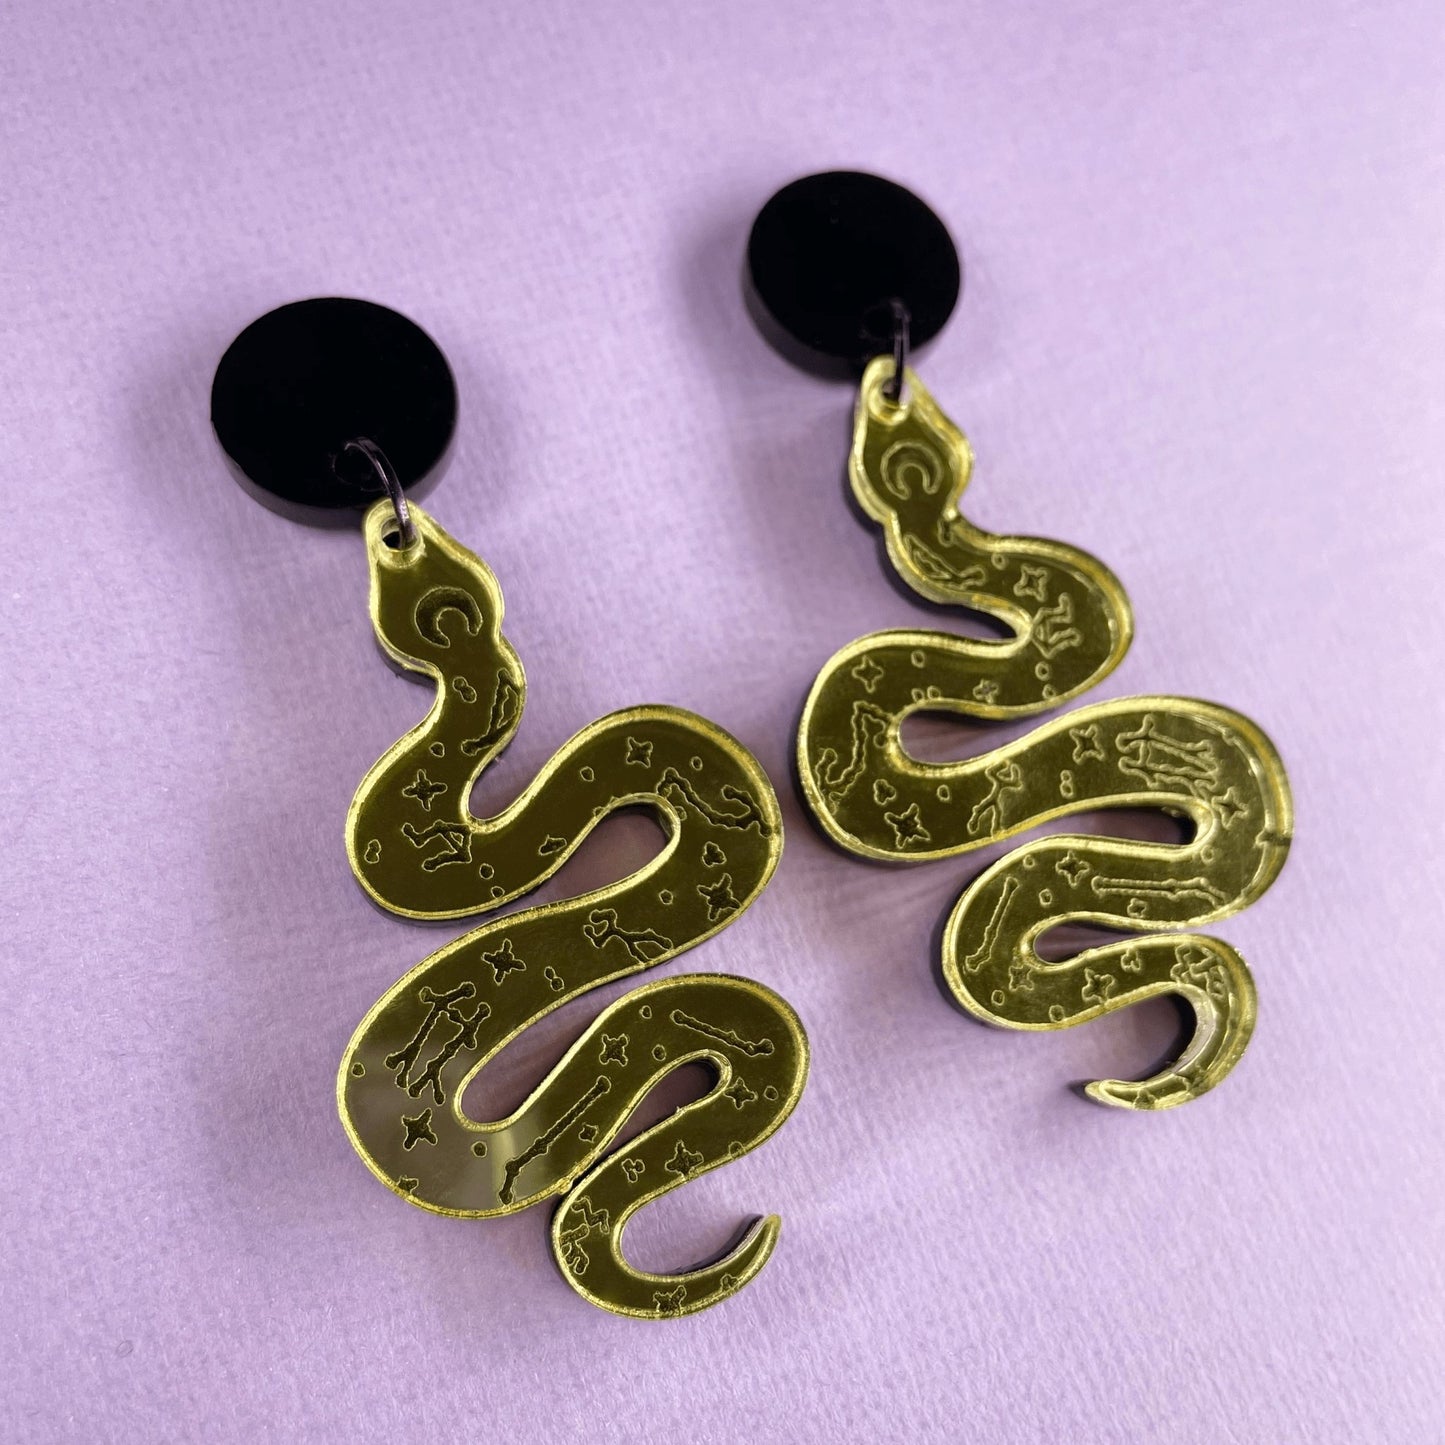 Golden Snake Acrylic Earrings - Lost Minds Clothing